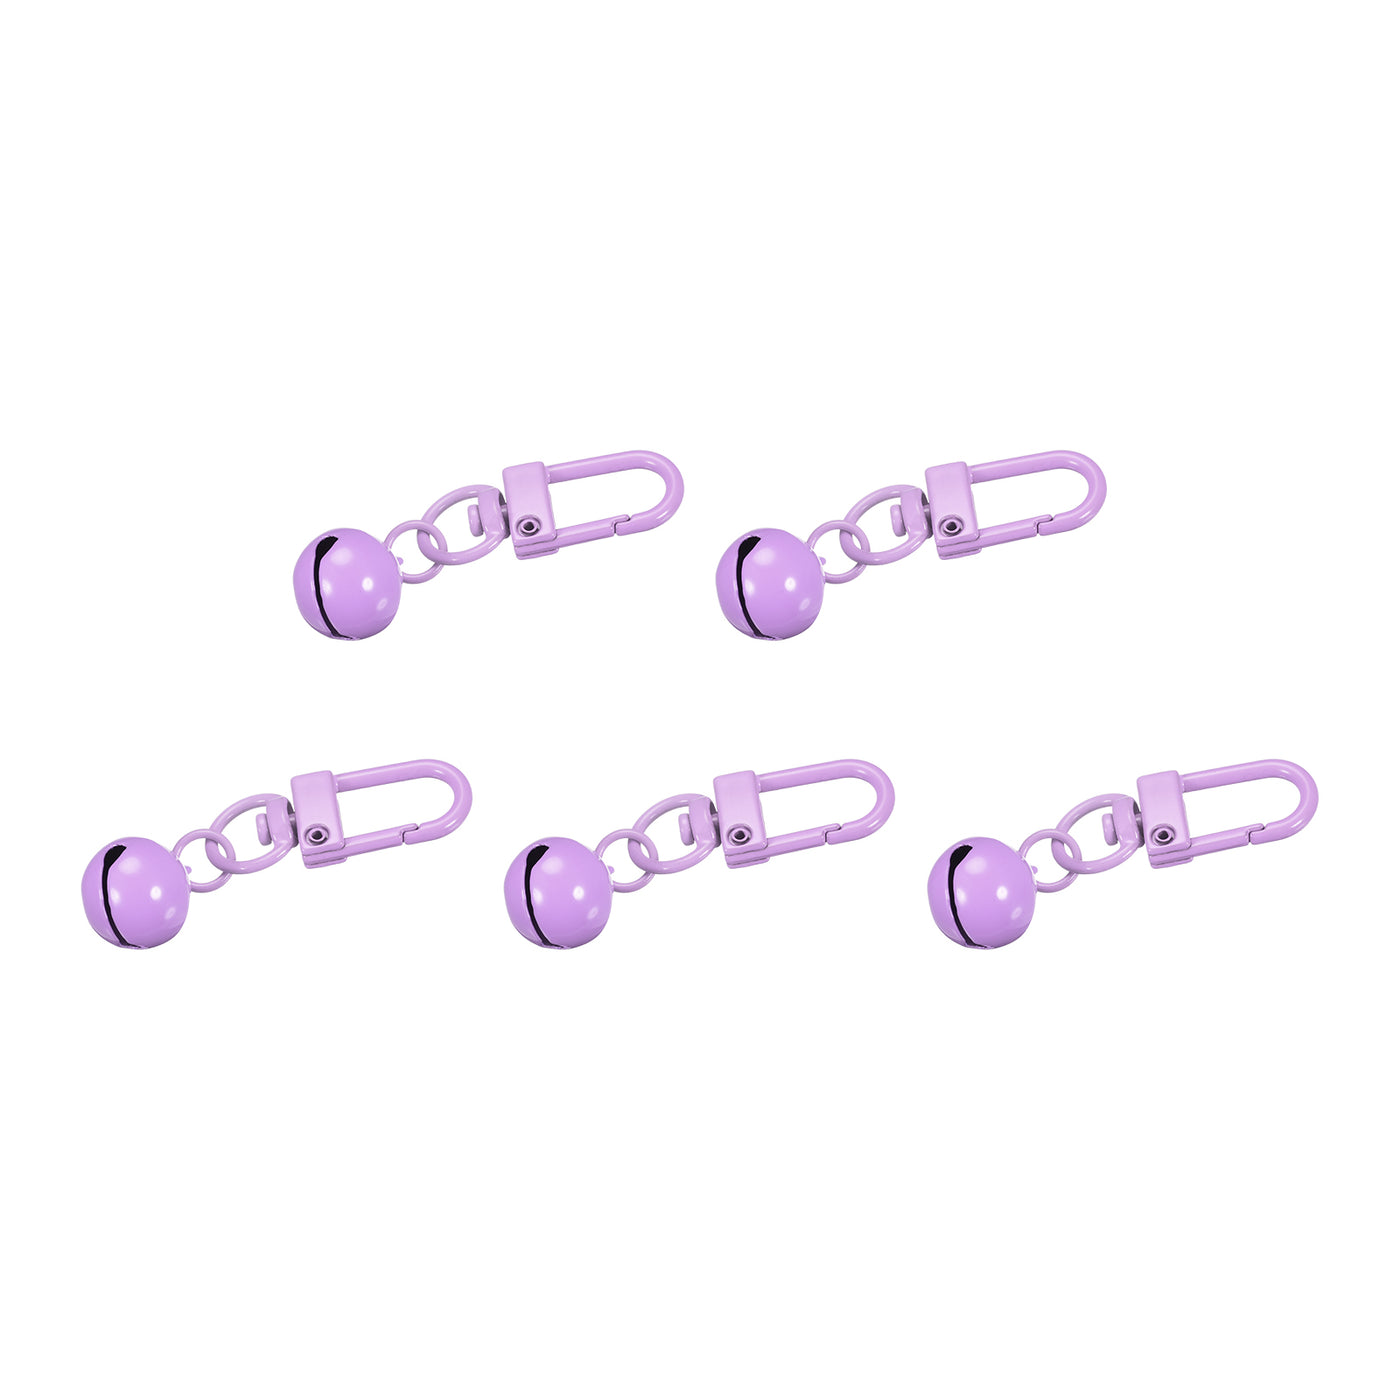 uxcell Uxcell 5Pcs Pet Bells, 13mm/0.51" Dia Purple Bells with Clasps for DIY Crafts